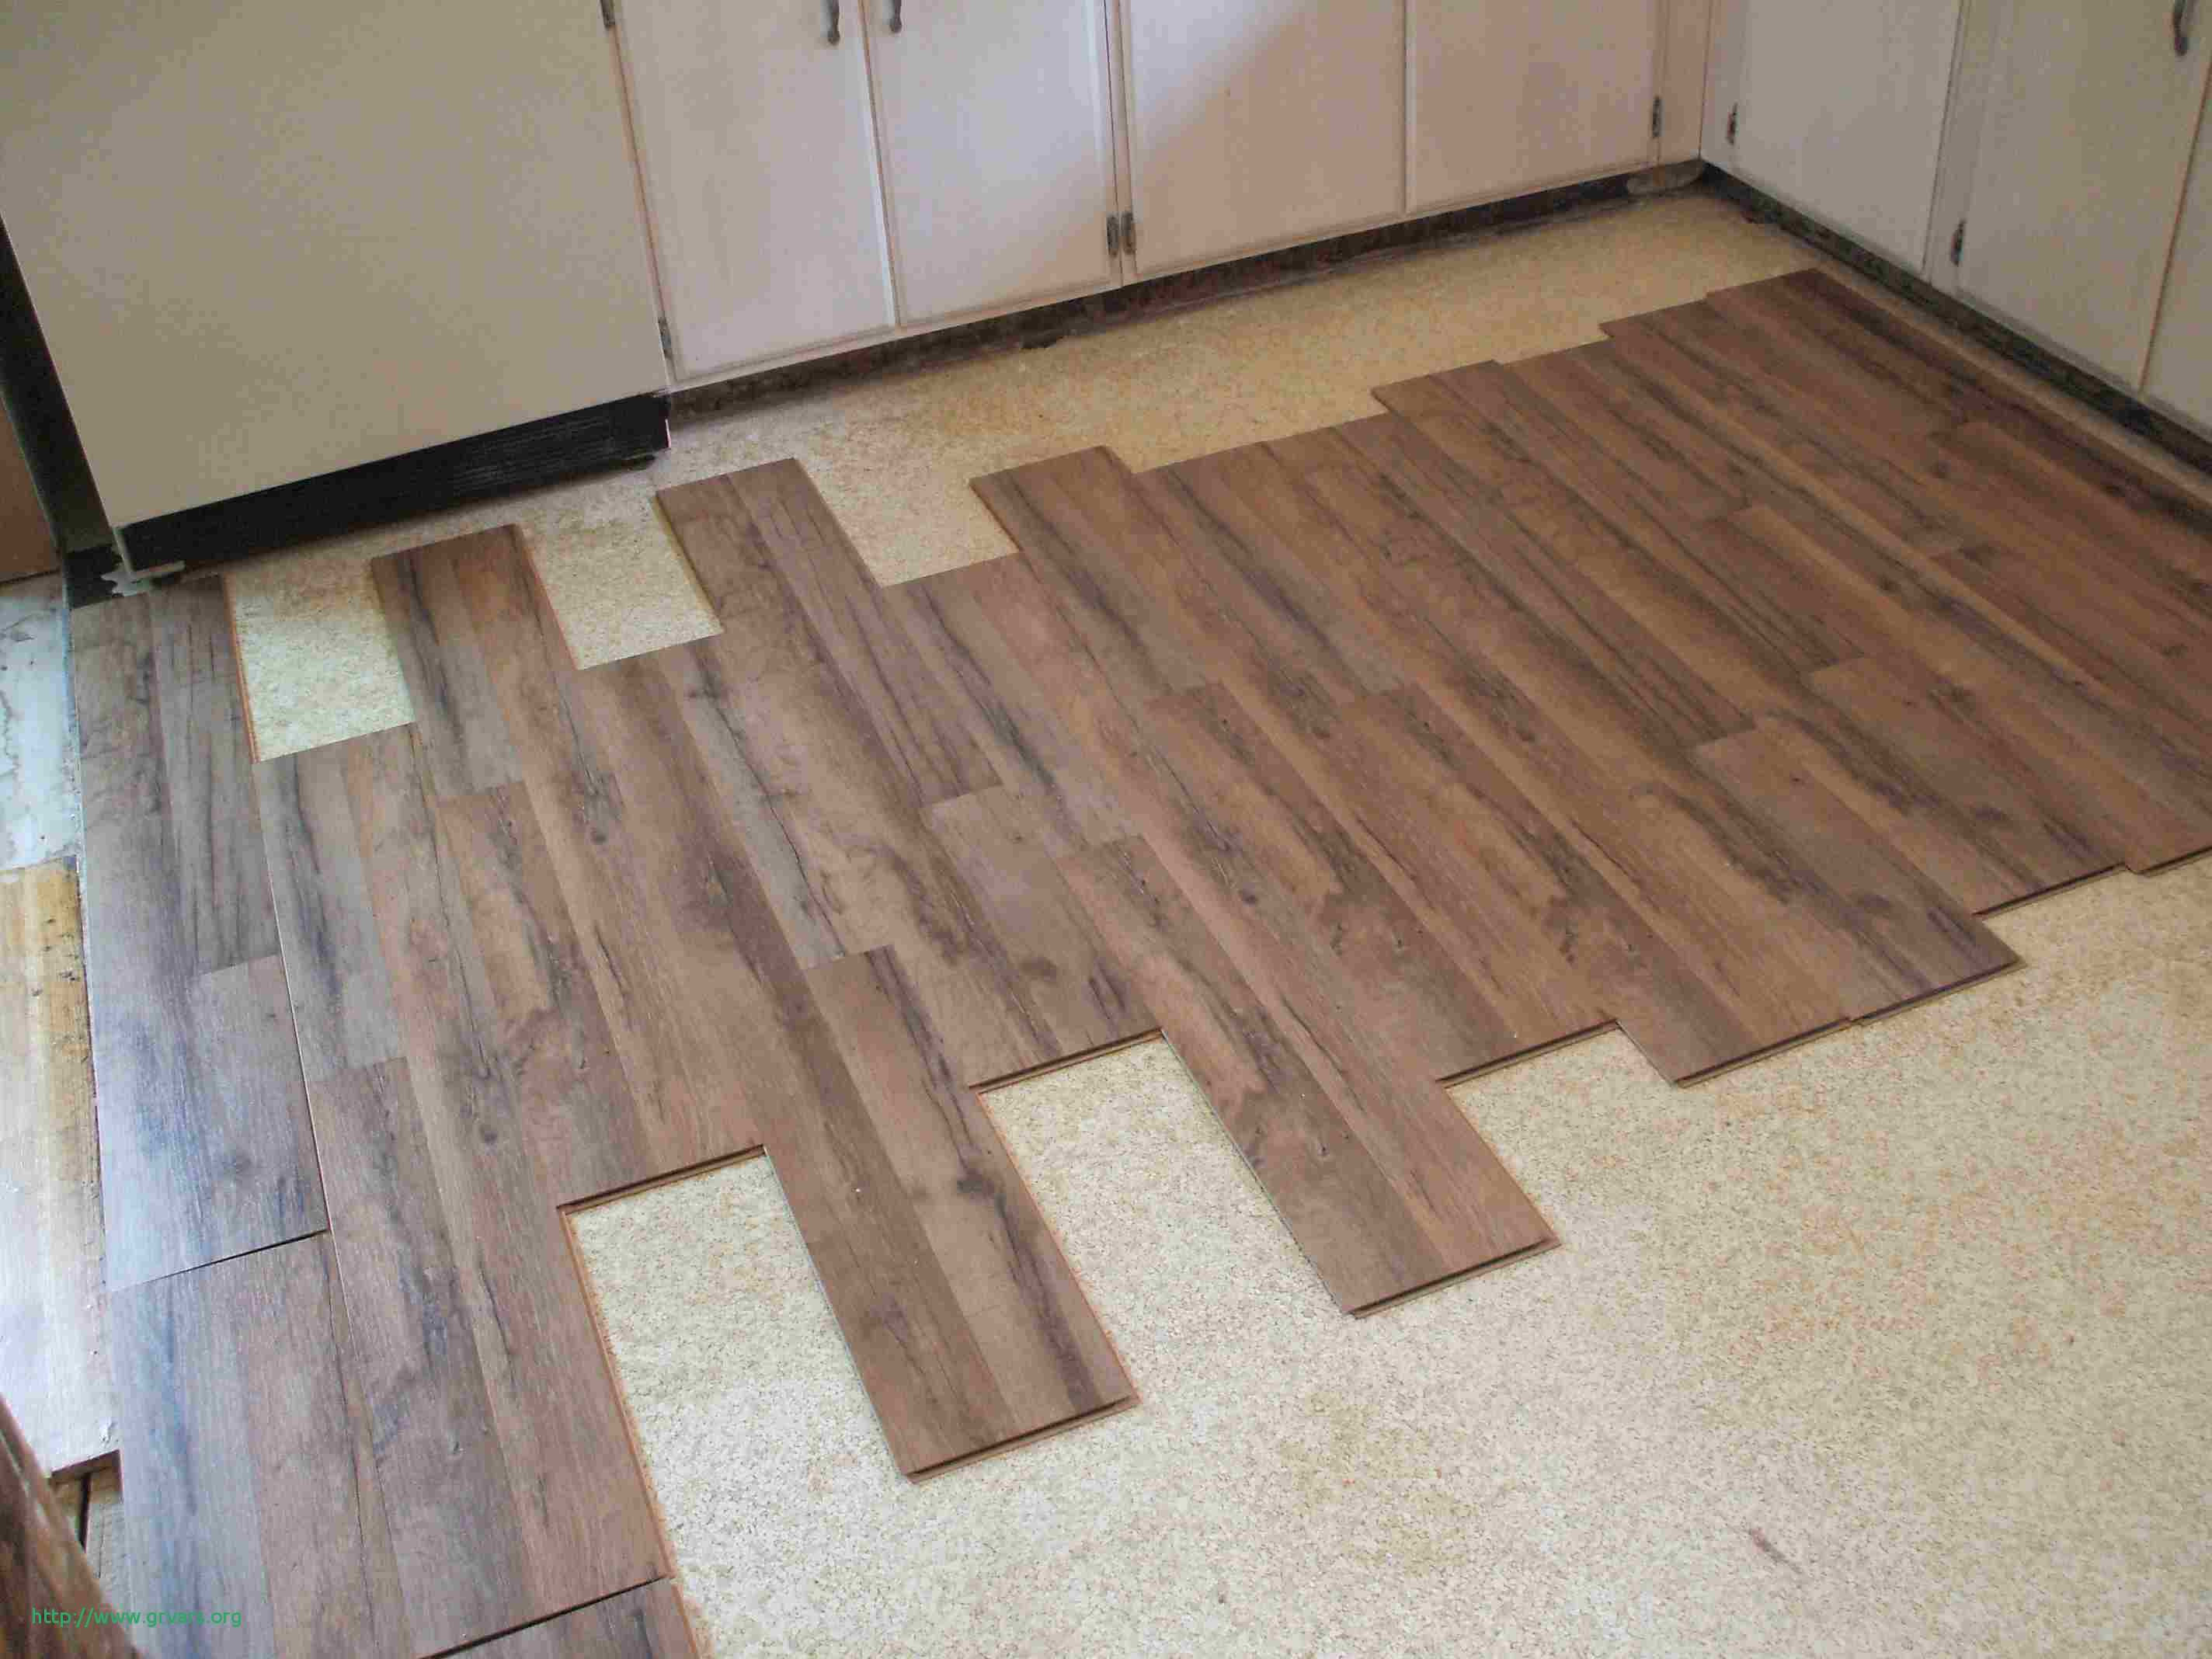 hardwood floor borders of 22 inspirant putting tile on wood floor ideas blog intended for putting tile on wood floor frais how to lay laminate flooring in e day